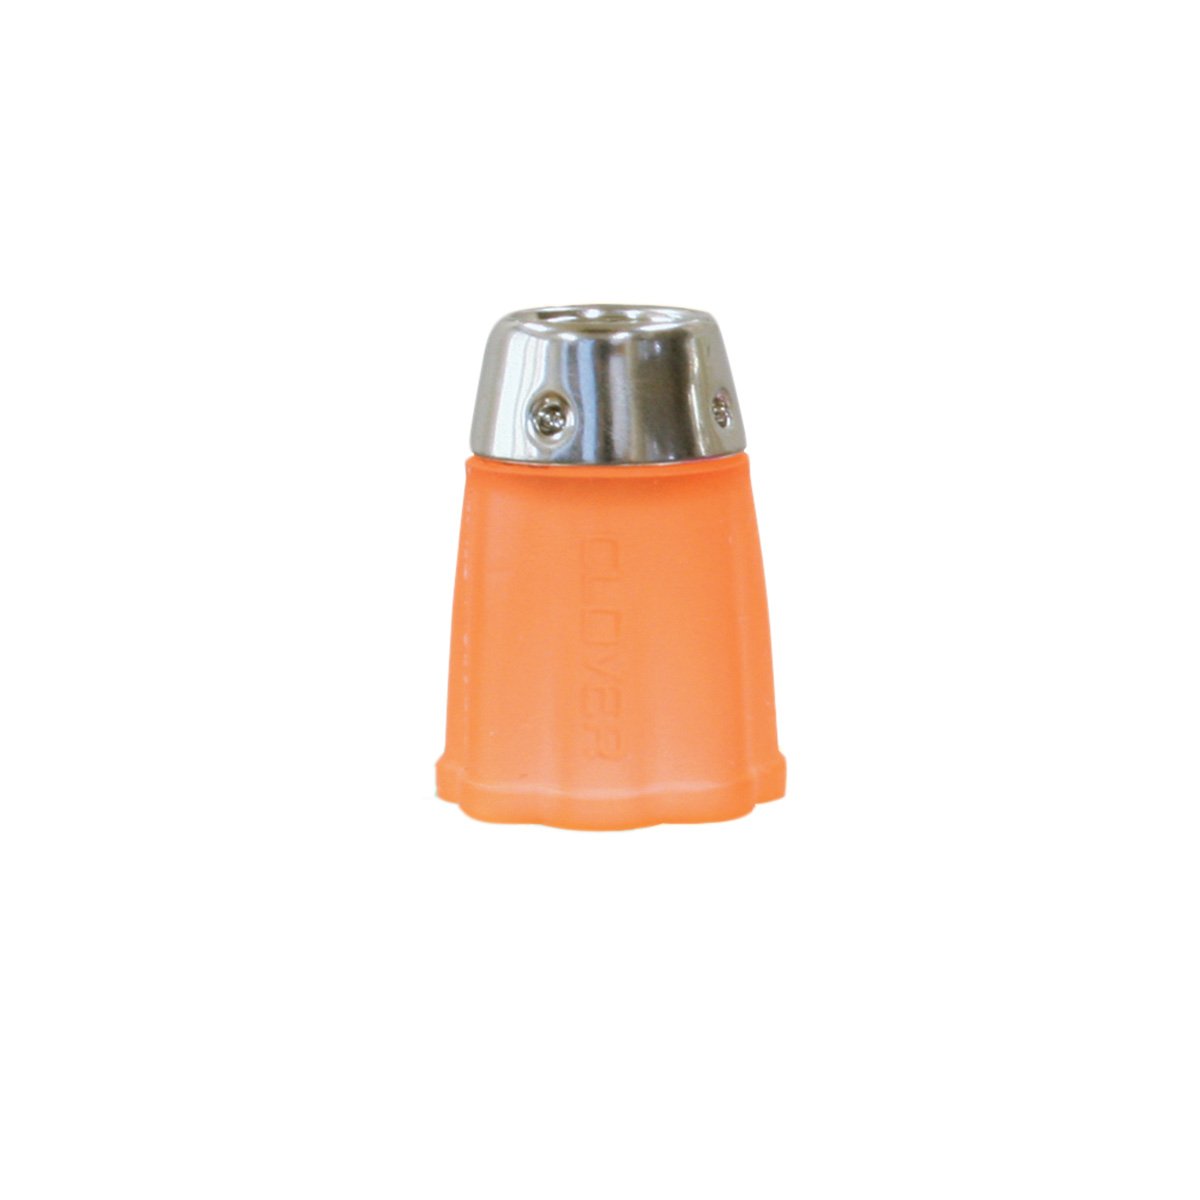 CLV - Protect and Grip Thimble - Small